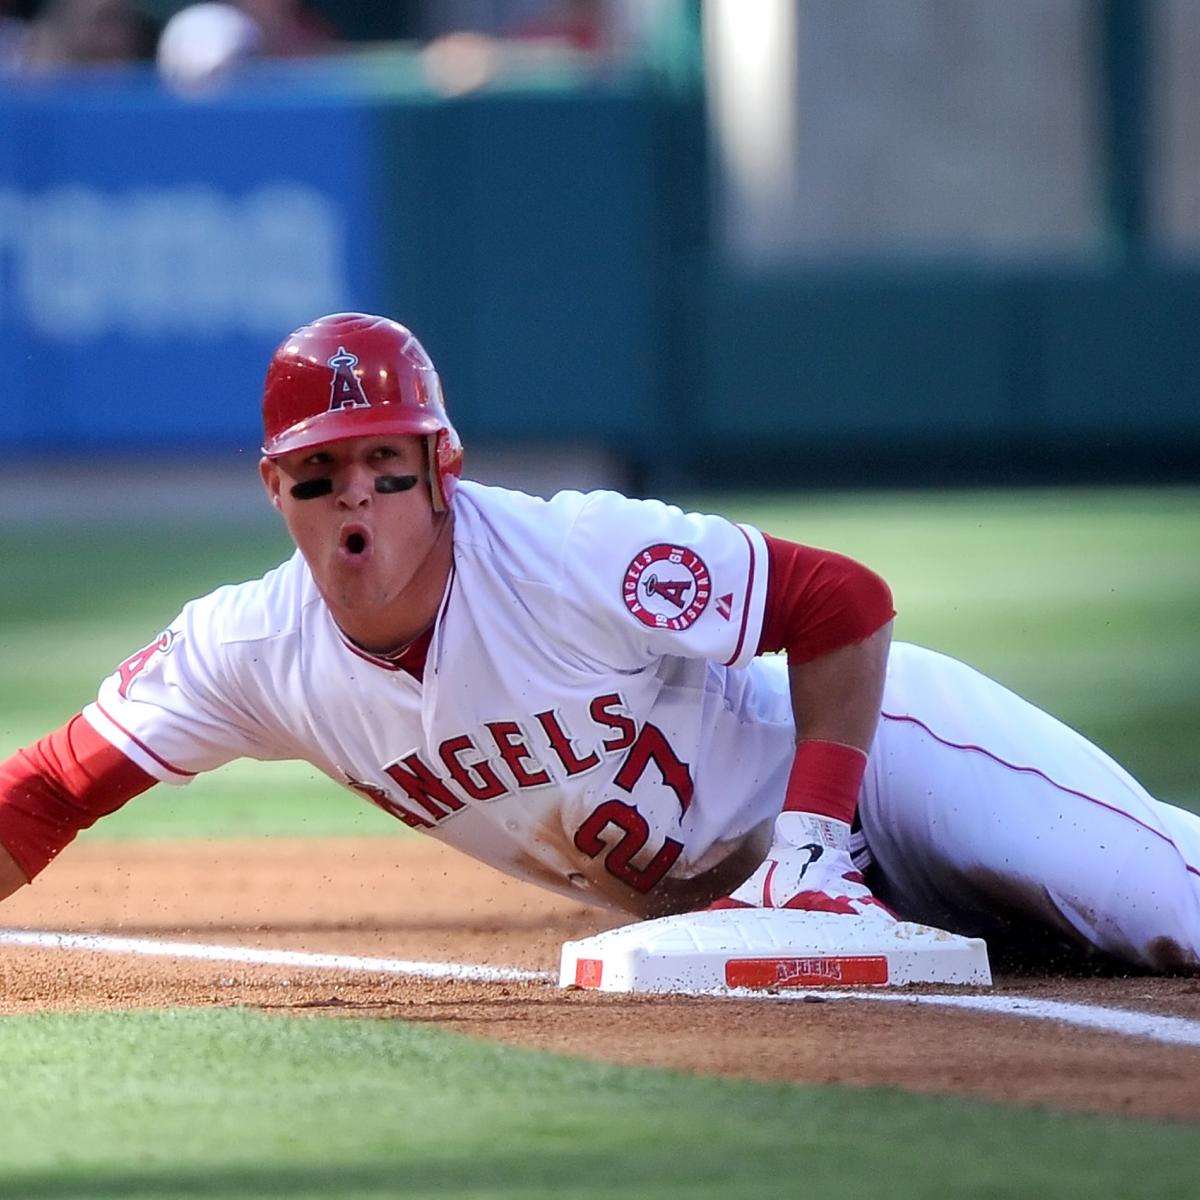 Mike Trout's Major League debut gave us a quick glimpse of the